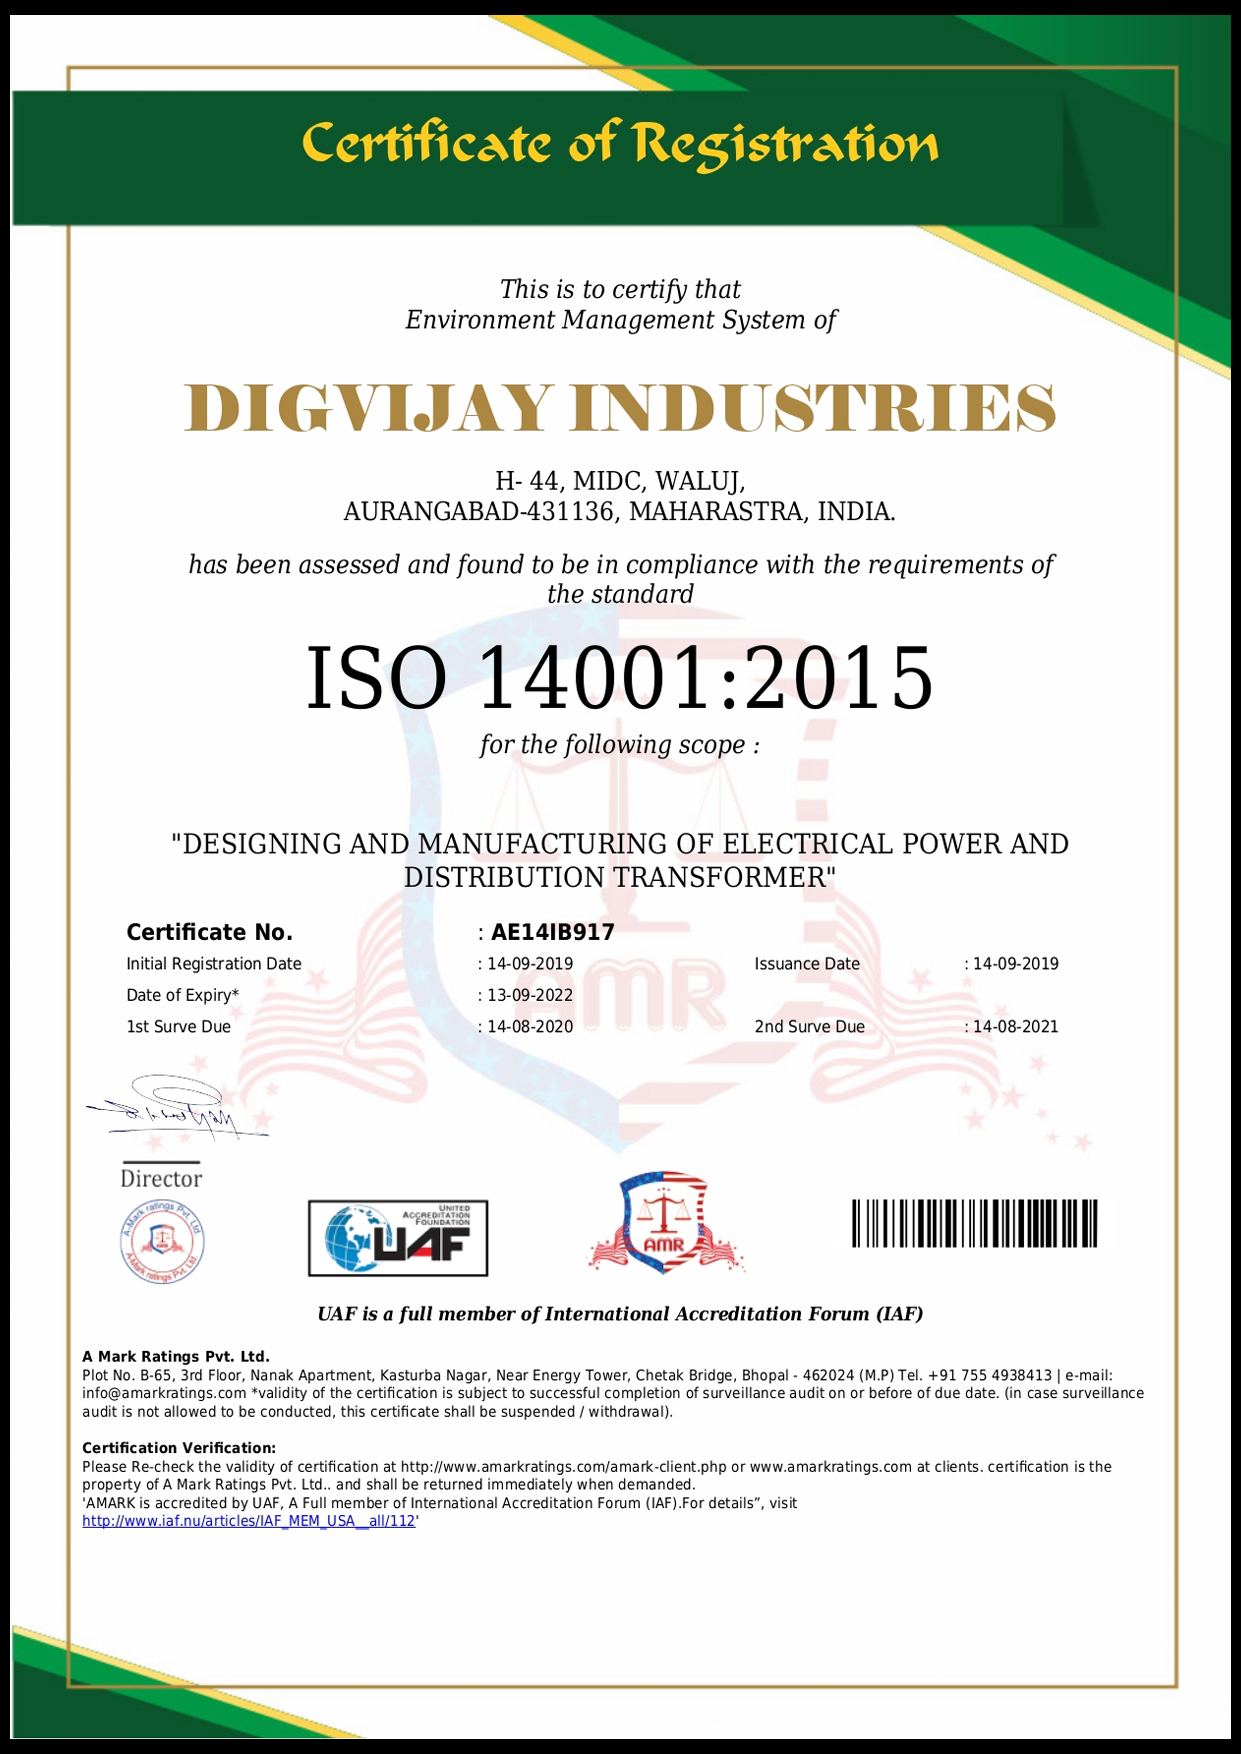 Digvijay Industries Quality Certificate